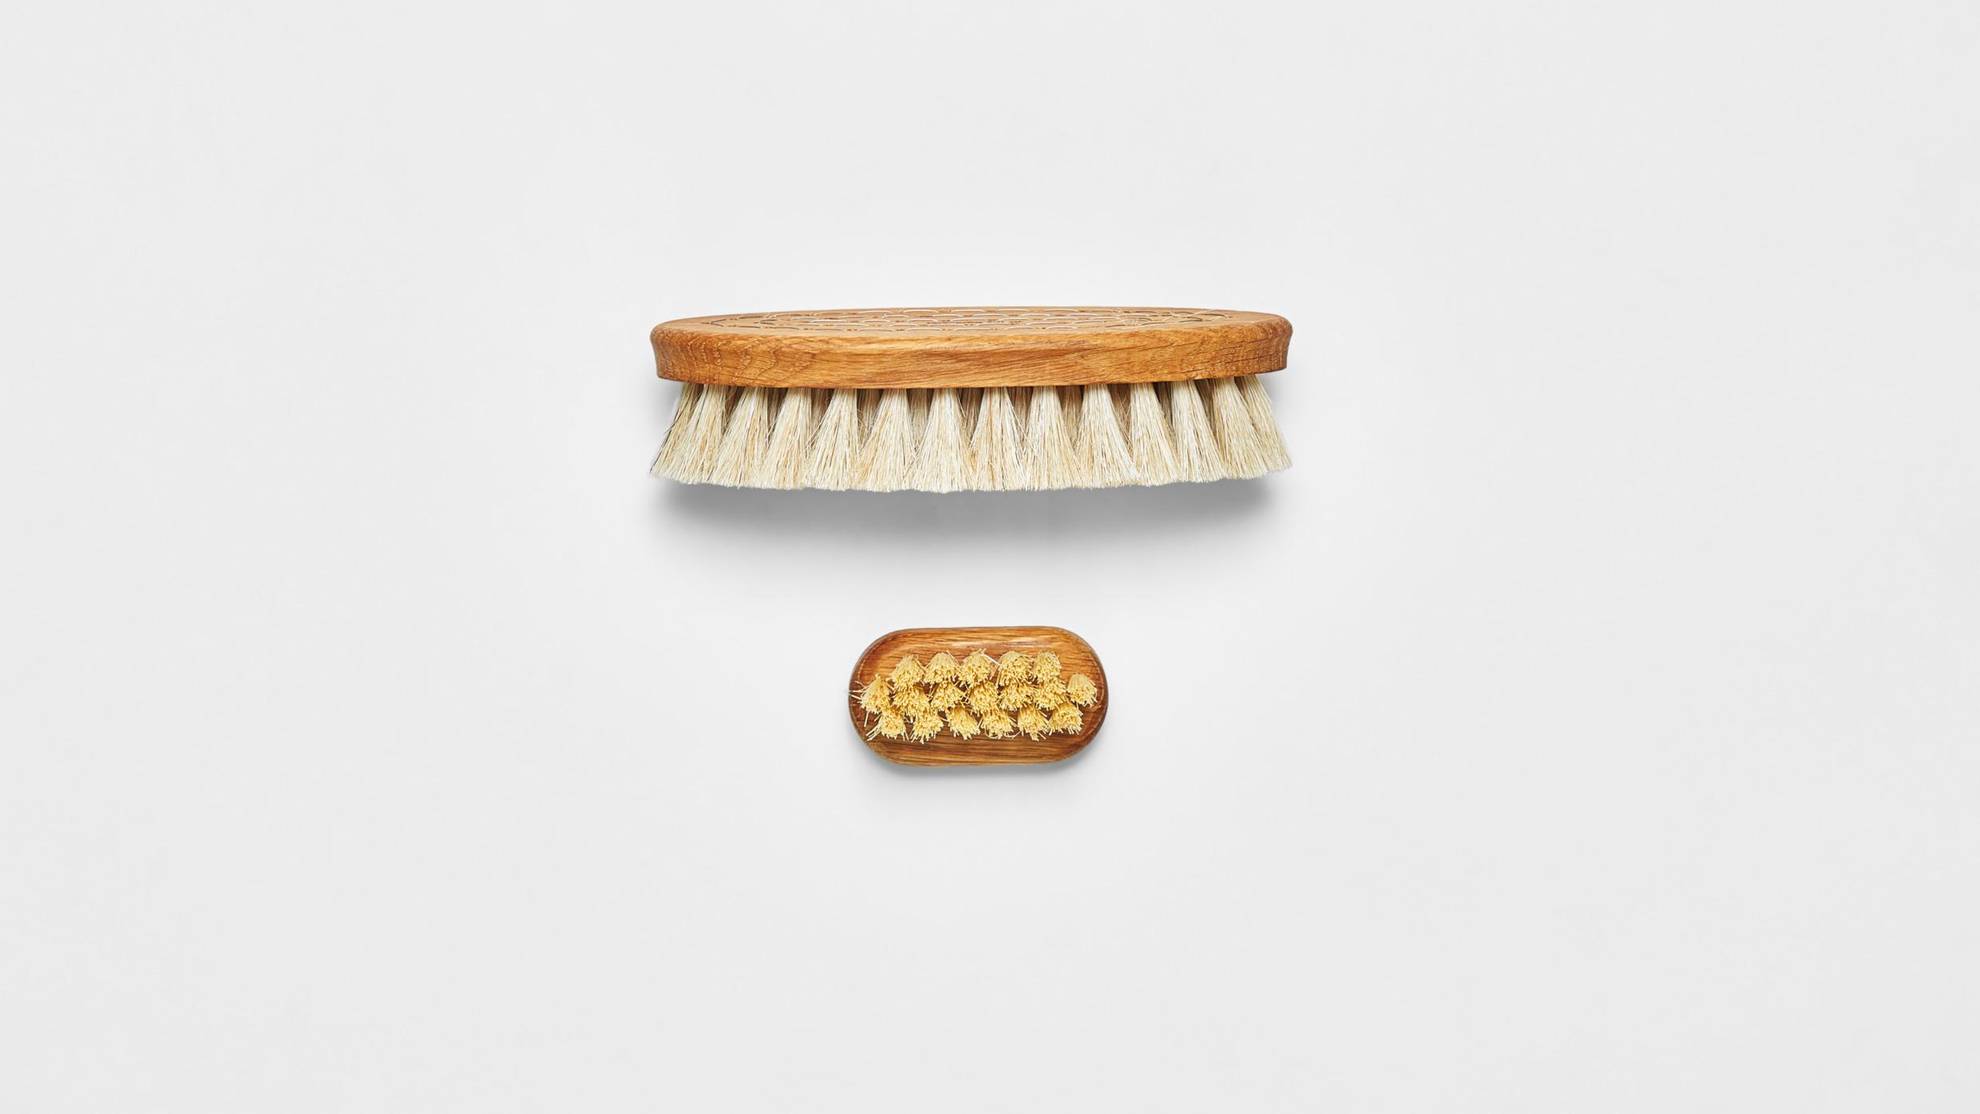 A wooden bath brush on a white surface.